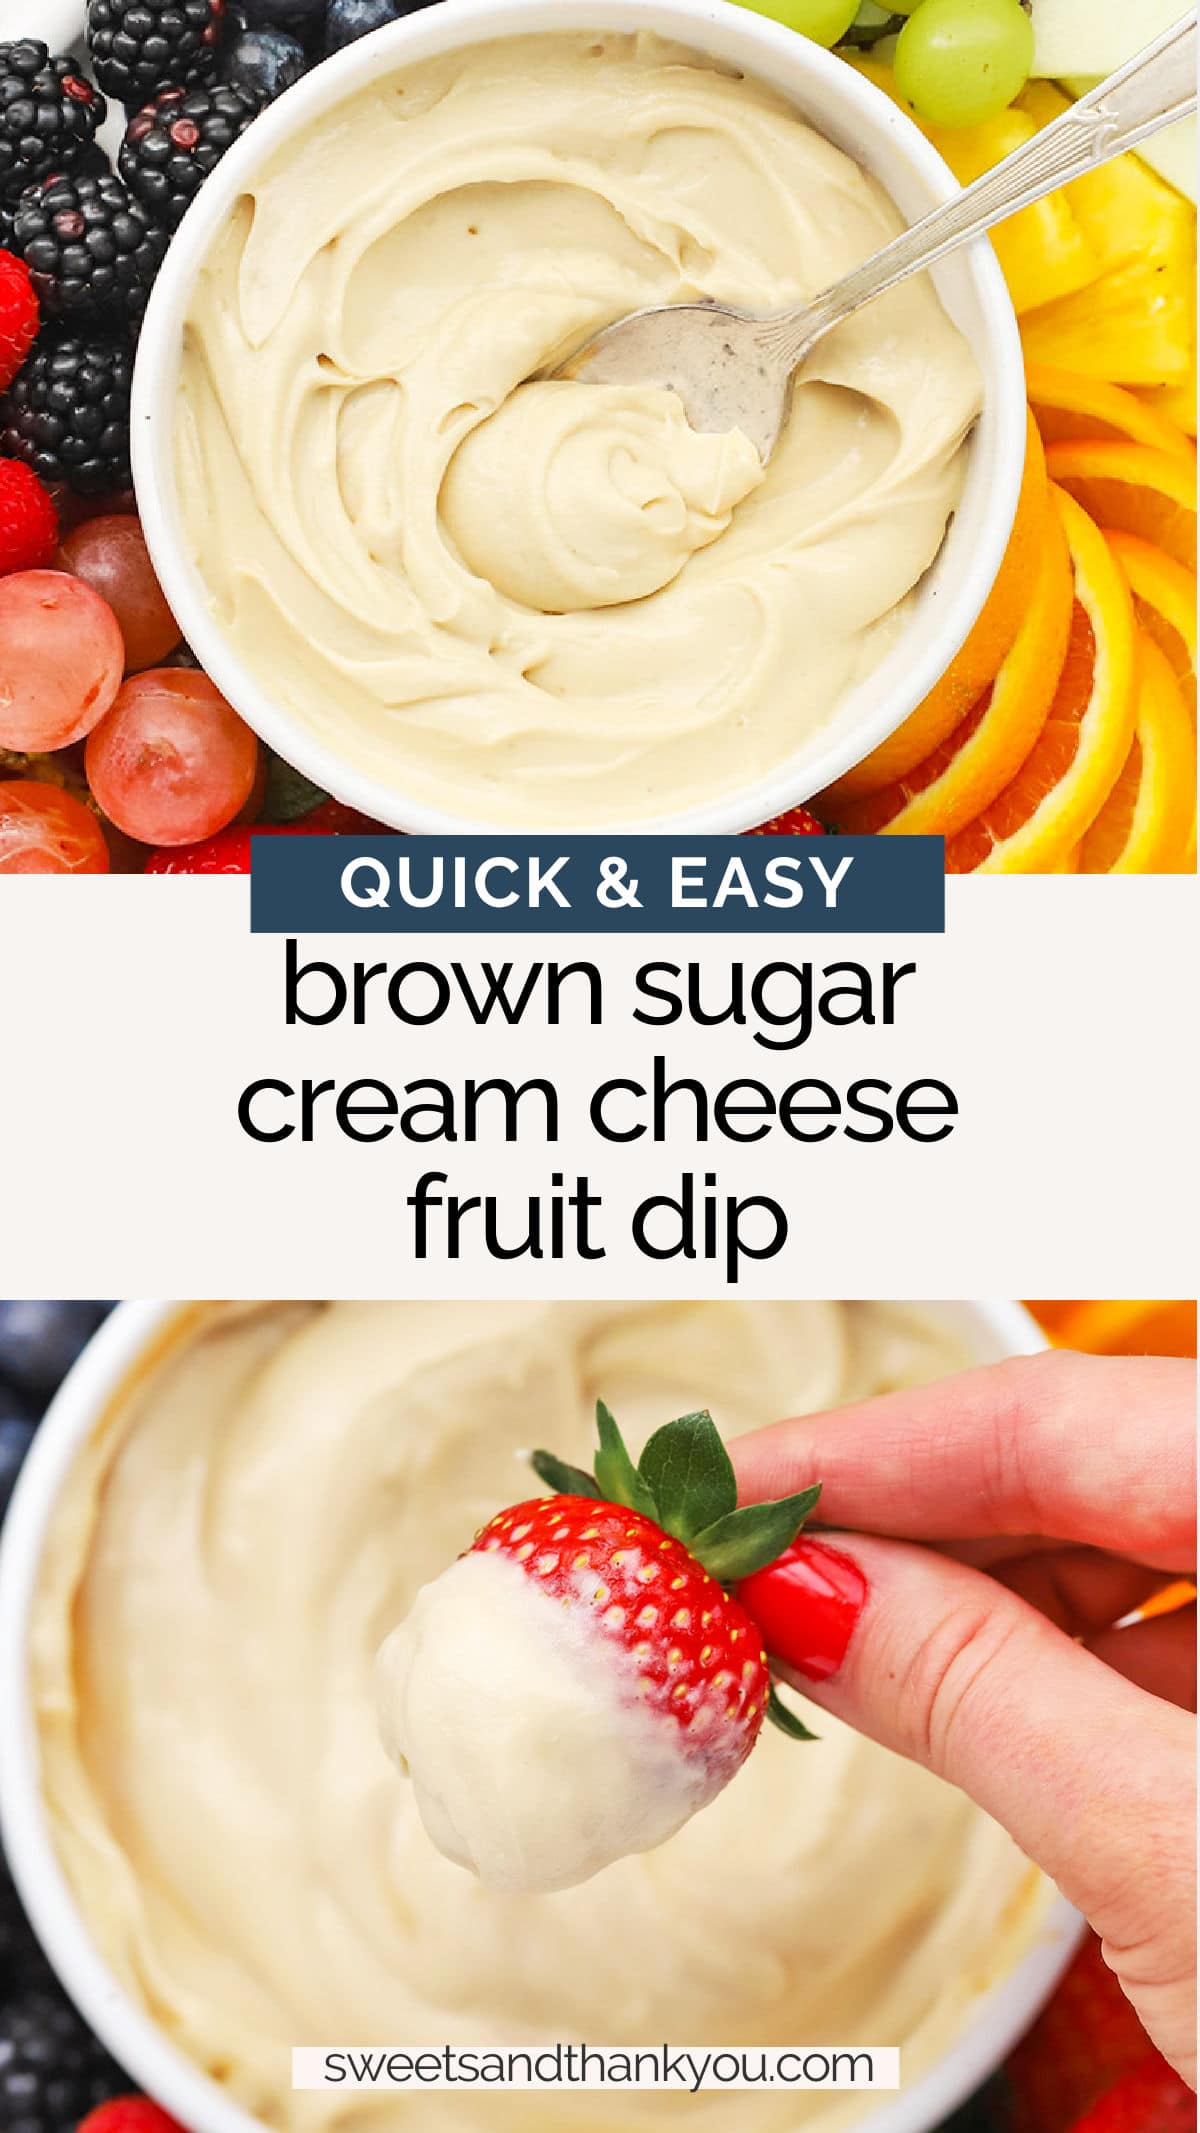 Brown Sugar Cream Cheese Fruit Dip - This easy brown sugar fruit dip recipe only takes 5 ingredients and less than 5 minutes to make. It makes every occasion a little more delicious! // Cream Cheese Fruit Dip Recipe // brown sugar dip // caramel cream cheese fruit dip // party fruit dip // fruit tray // gluten free fruit dip // fruit dip without yogurt // fruit dip without sour cream // caramel brown sugar fruit dip